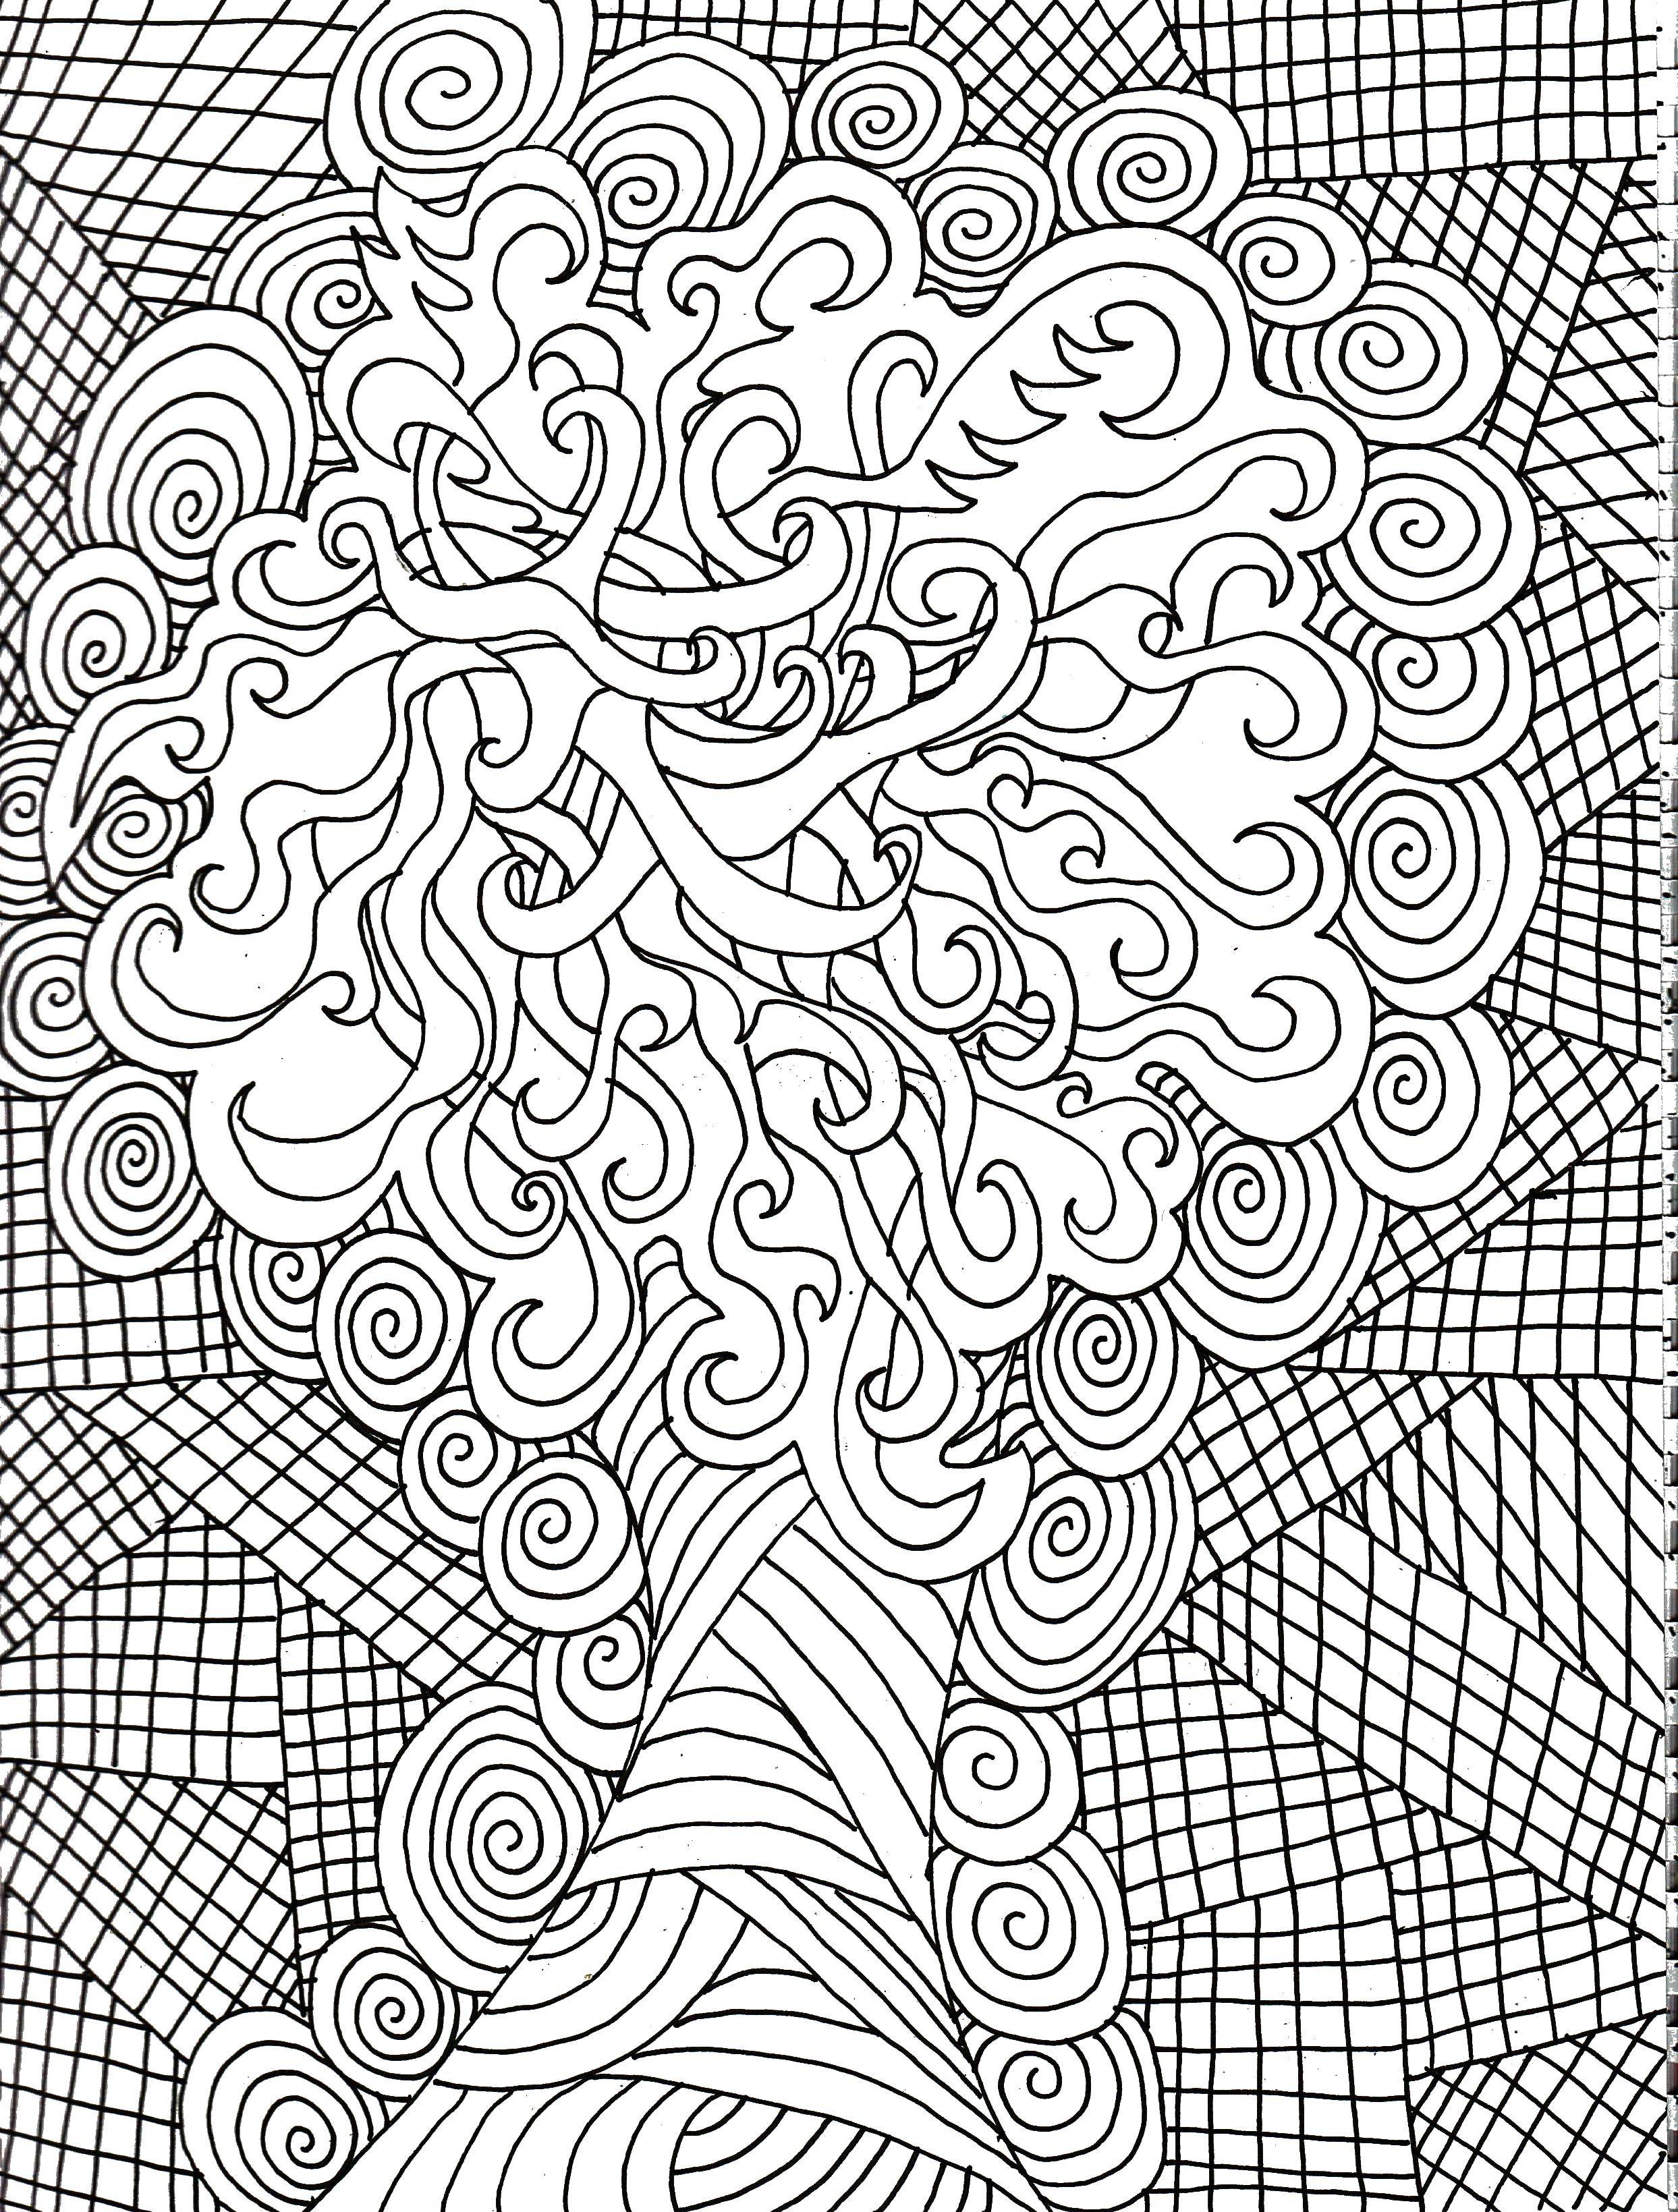 Coloring Tree pattern. Category patterns. Tags:  patterns, anti-stress, trees.